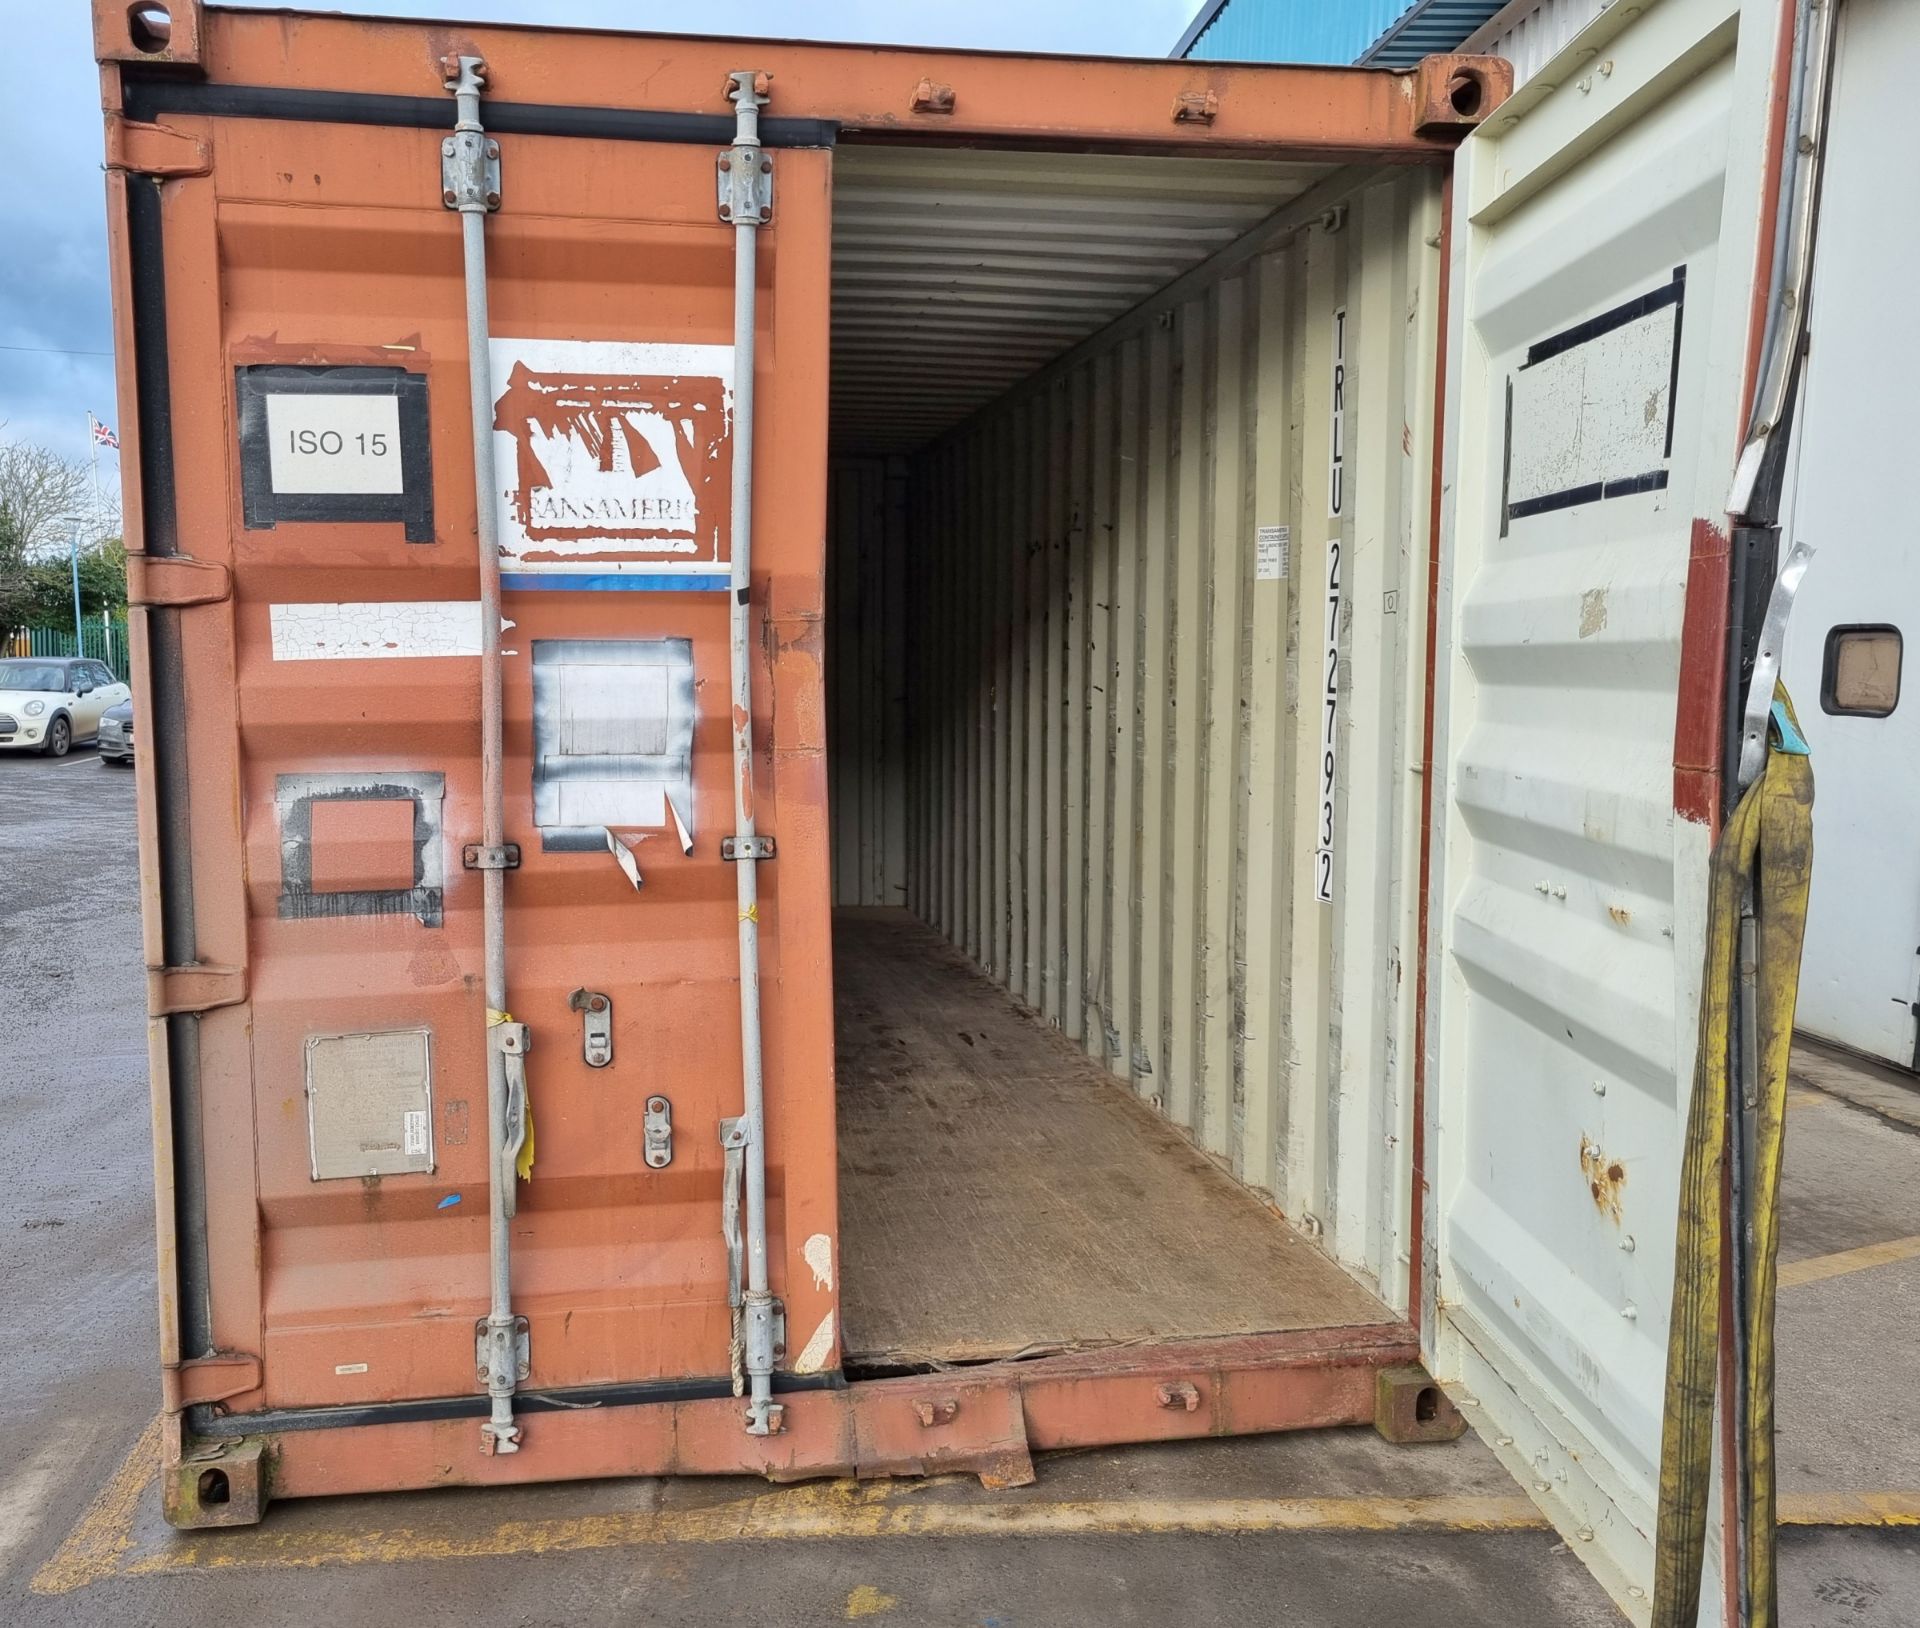 Med Union - Model MU20-1001-TA shipping container - L600 x W240 x H258cm - Image 10 of 12